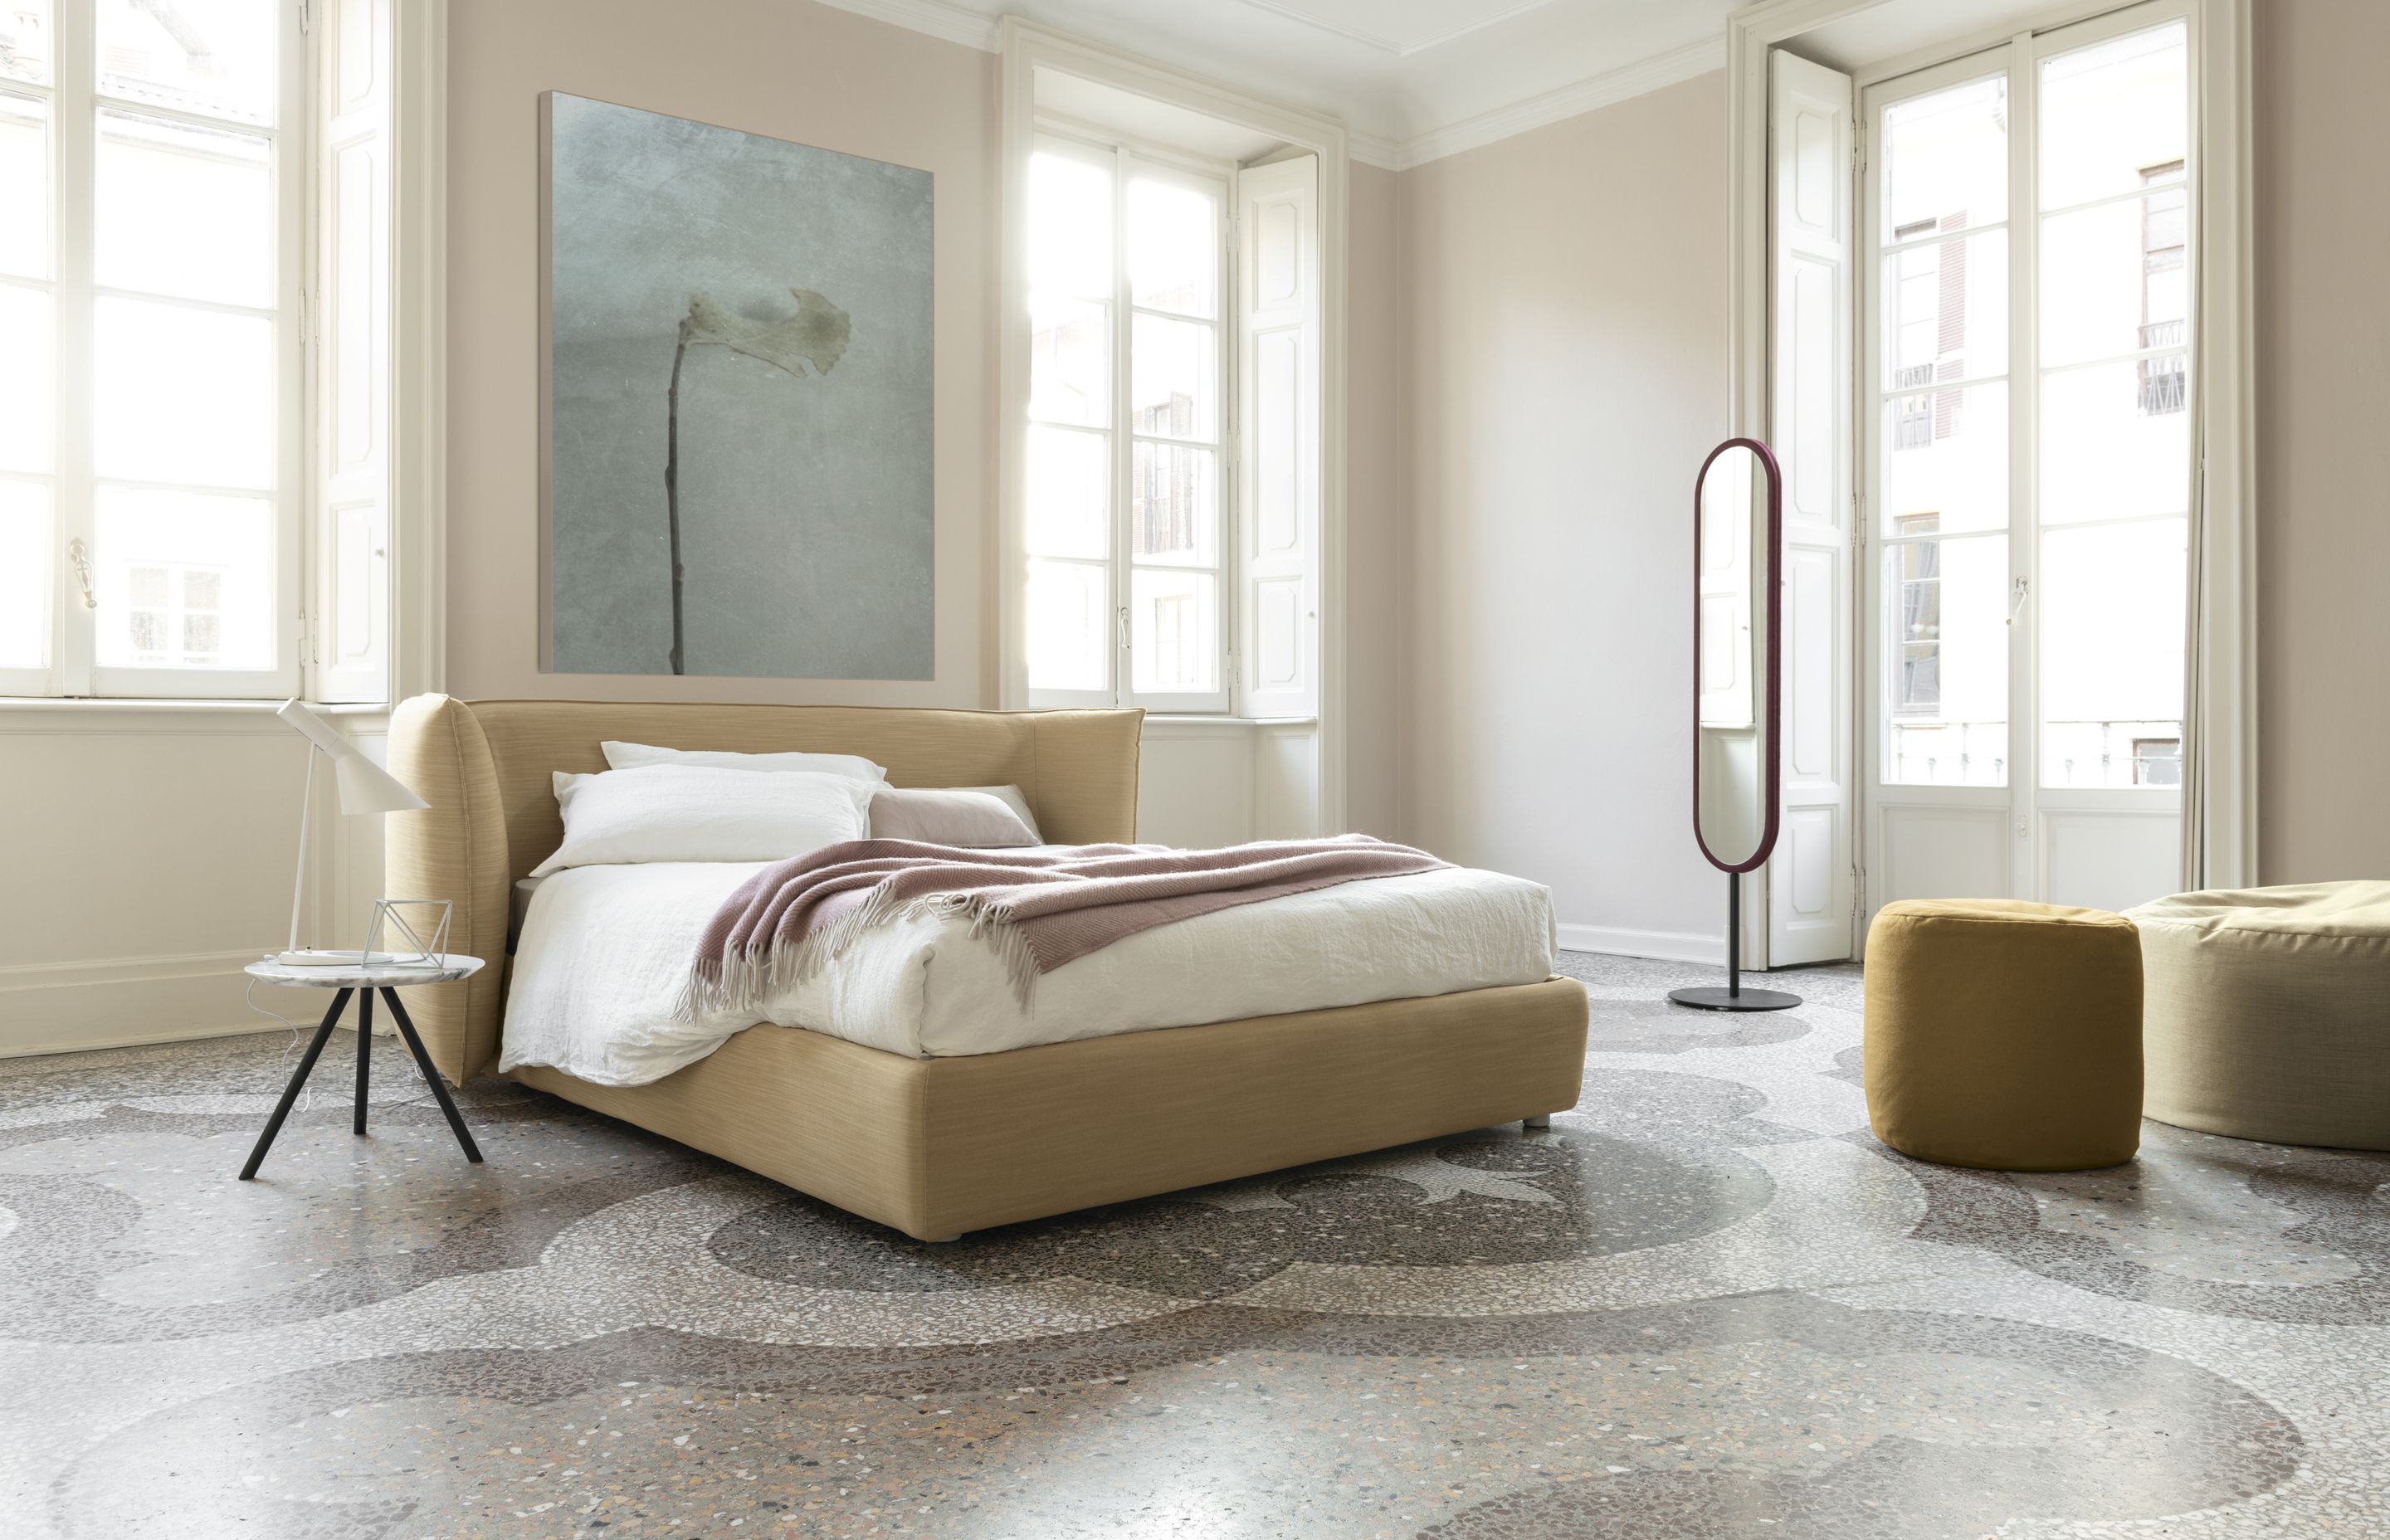 Through Henri Living, classic Bolzan beds are available to the Australian market in Australian sizes.